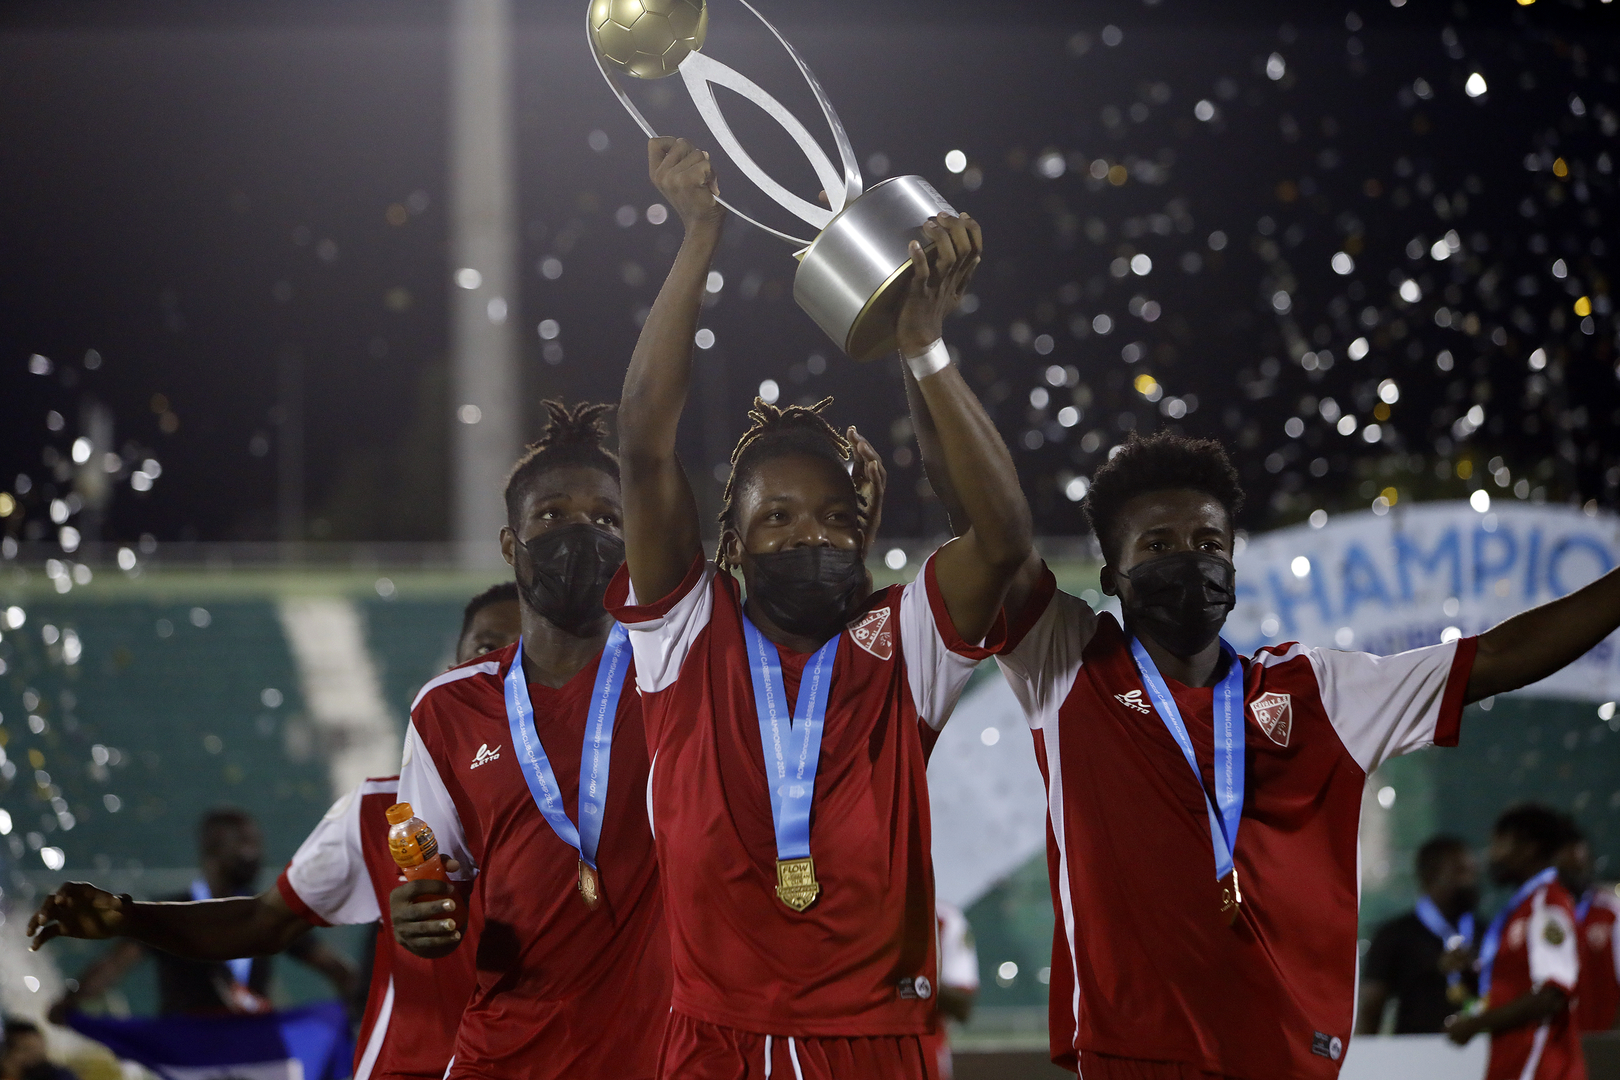 Concacaf announces details for 2022 Concacaf Caribbean Club Competitions